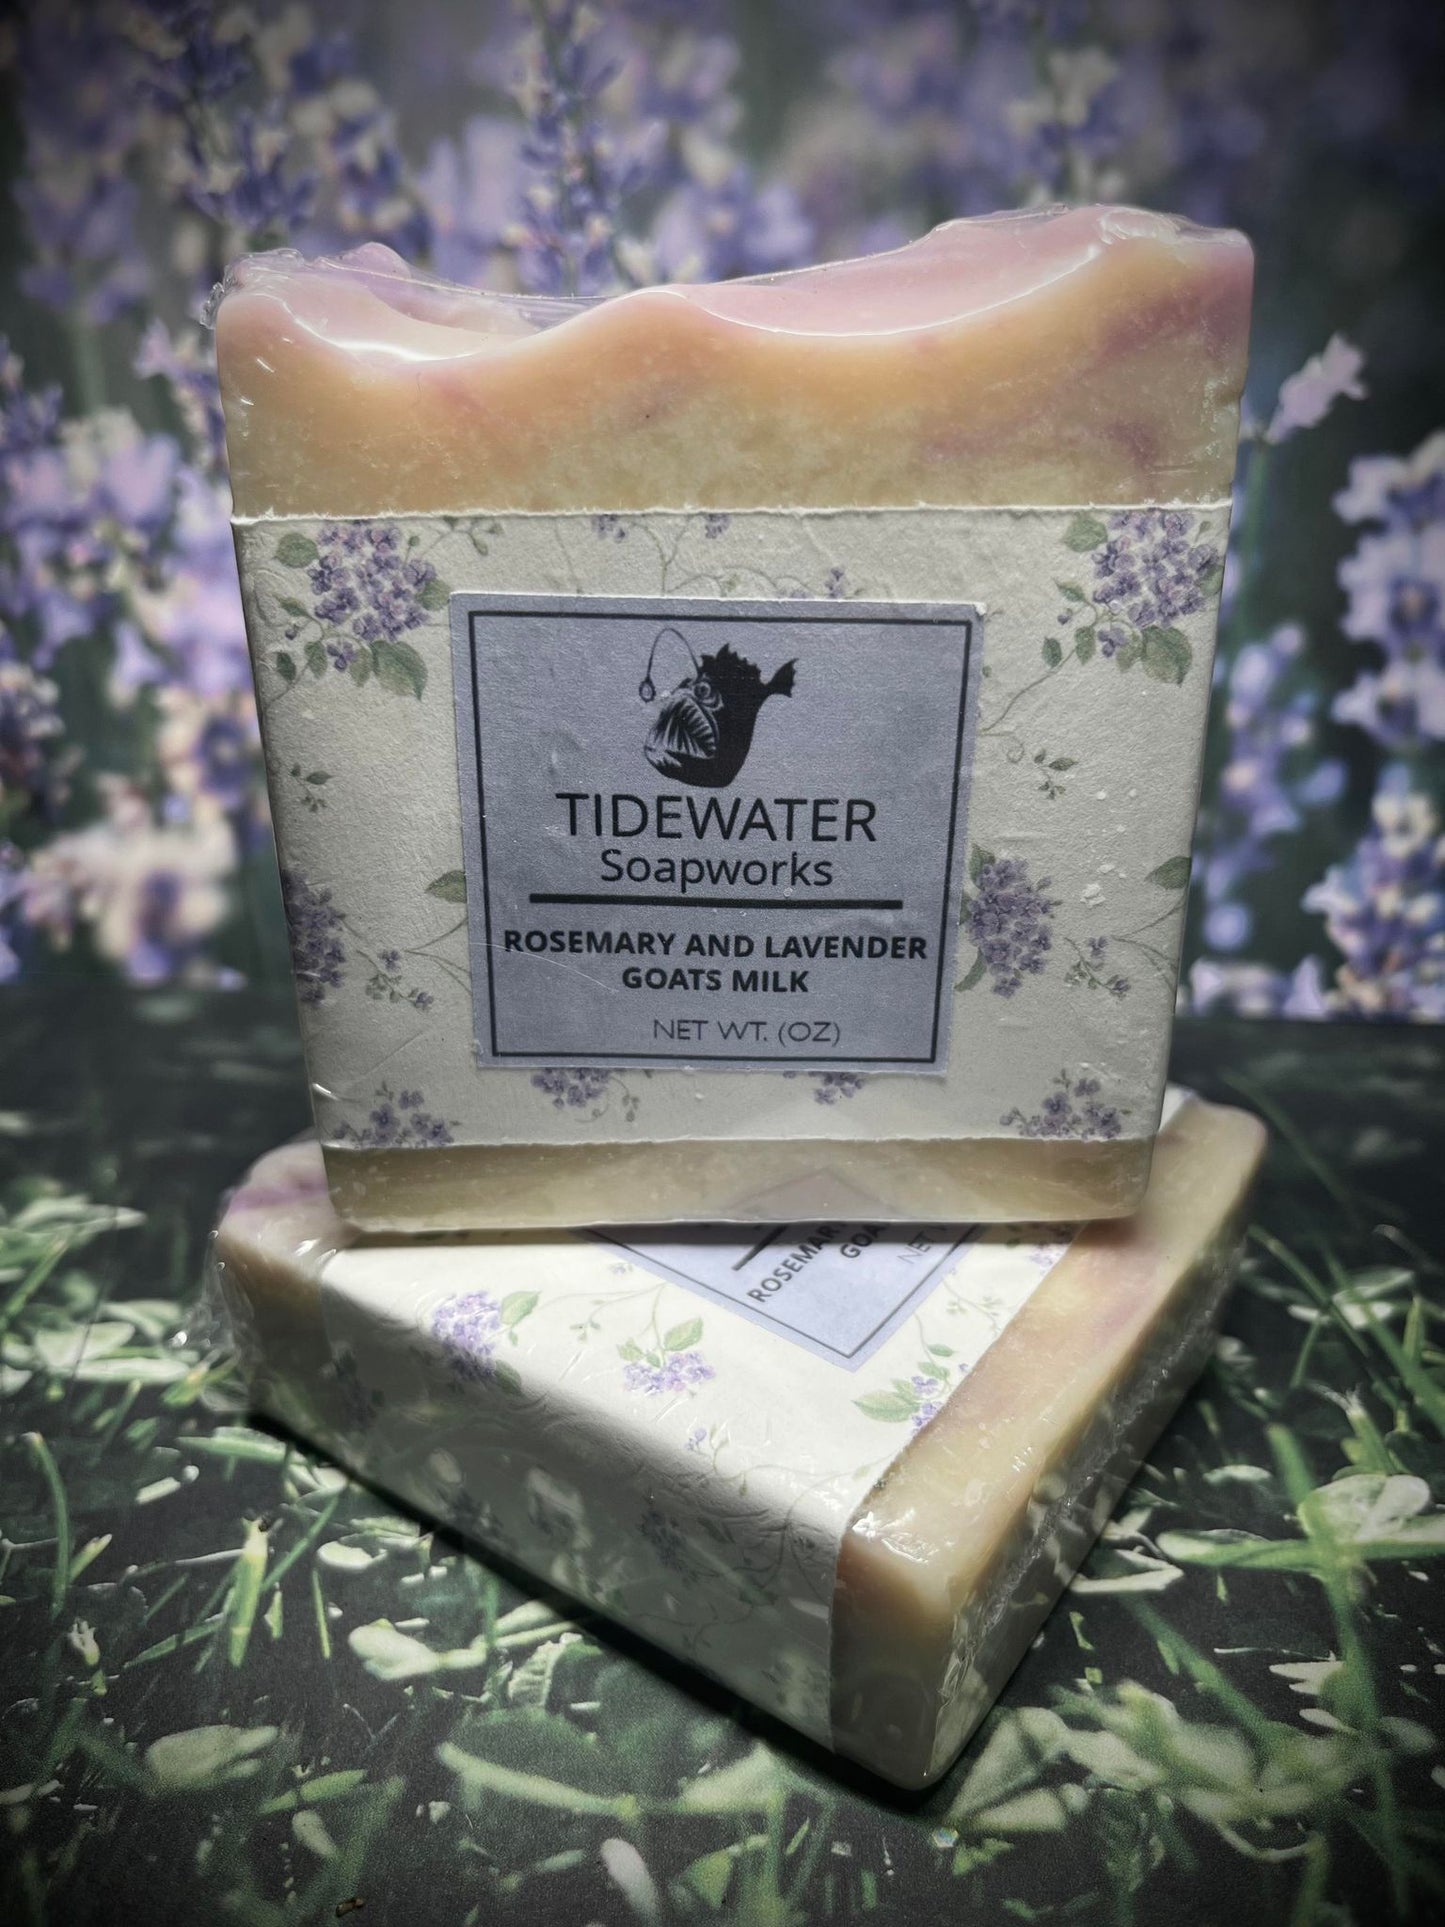 Rosemary and Lavender Goats Milk Soap